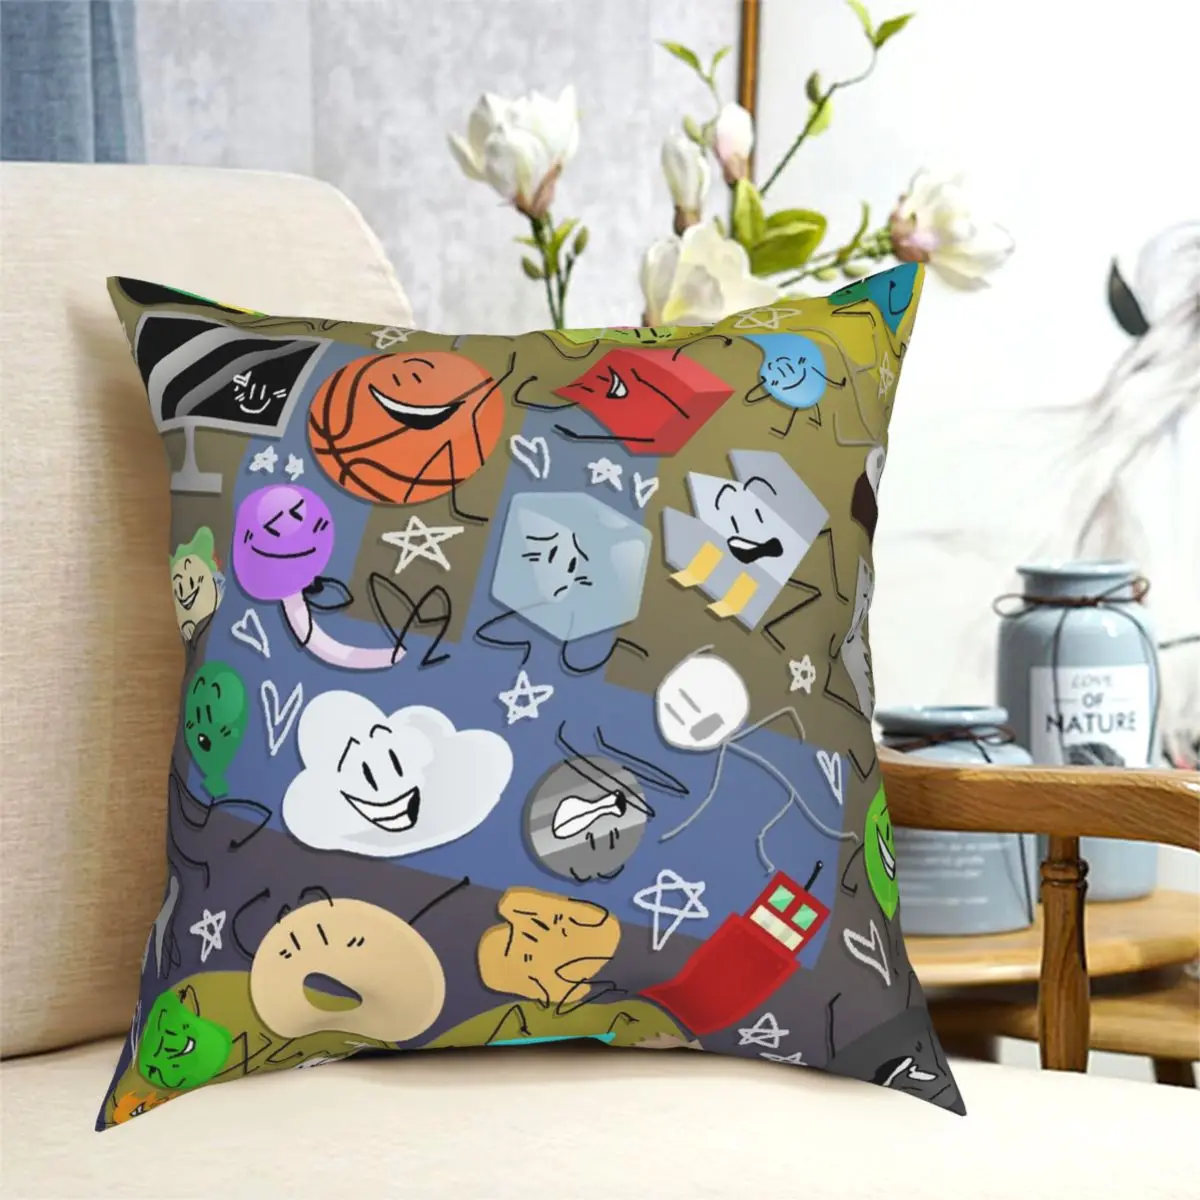 

Battle For BFDI Square Pillowcase Polyester Printed Zip Decor Throw Pillow Case for Sofa Seater Cushion Cover 18"